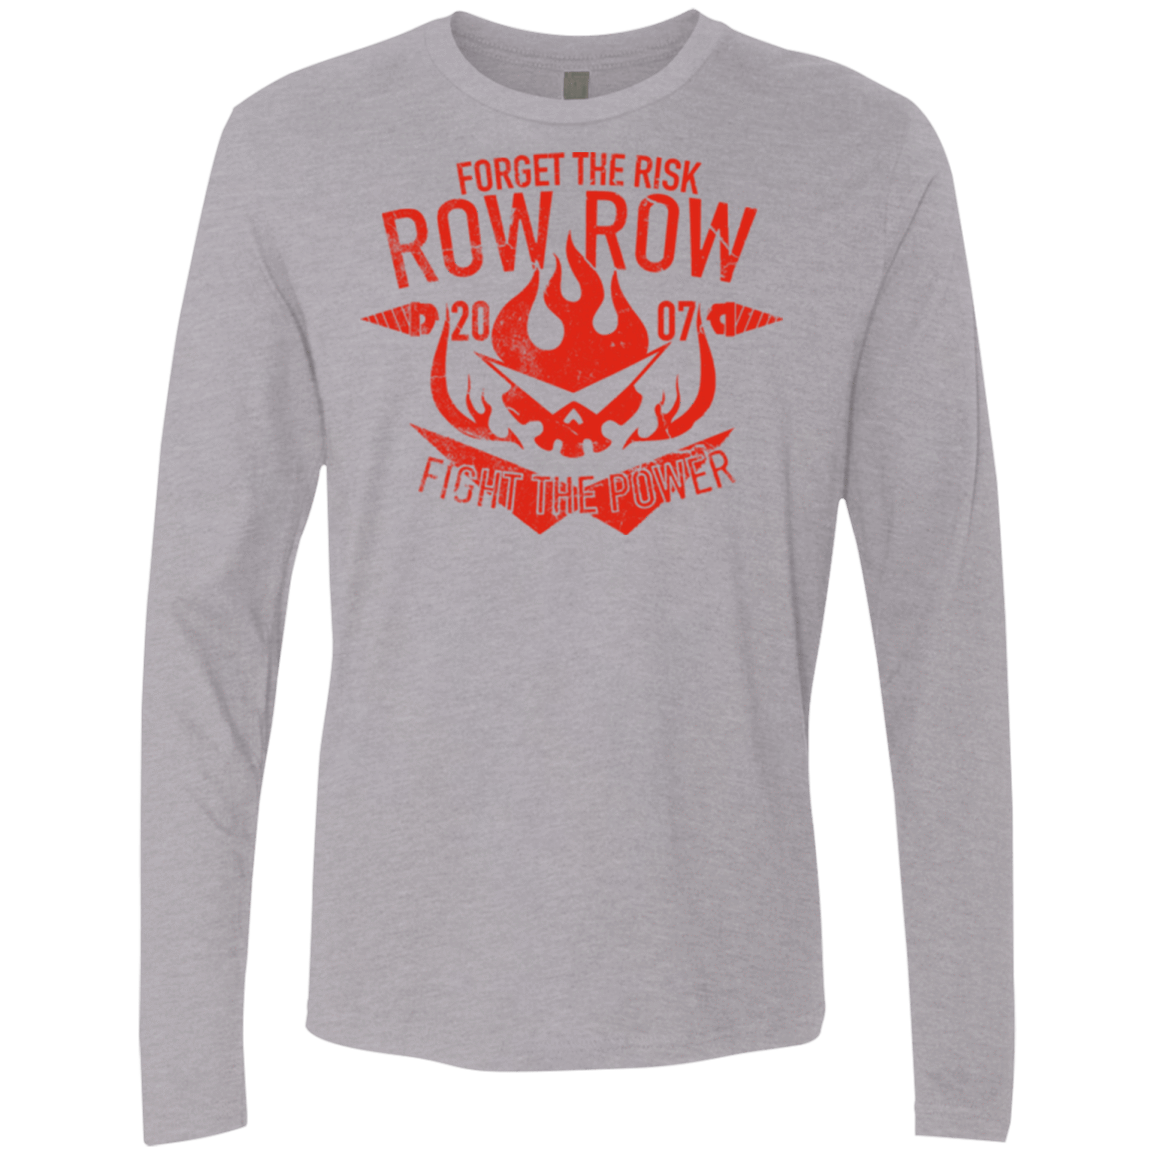 T-Shirts Heather Grey / Small Fight the power Men's Premium Long Sleeve